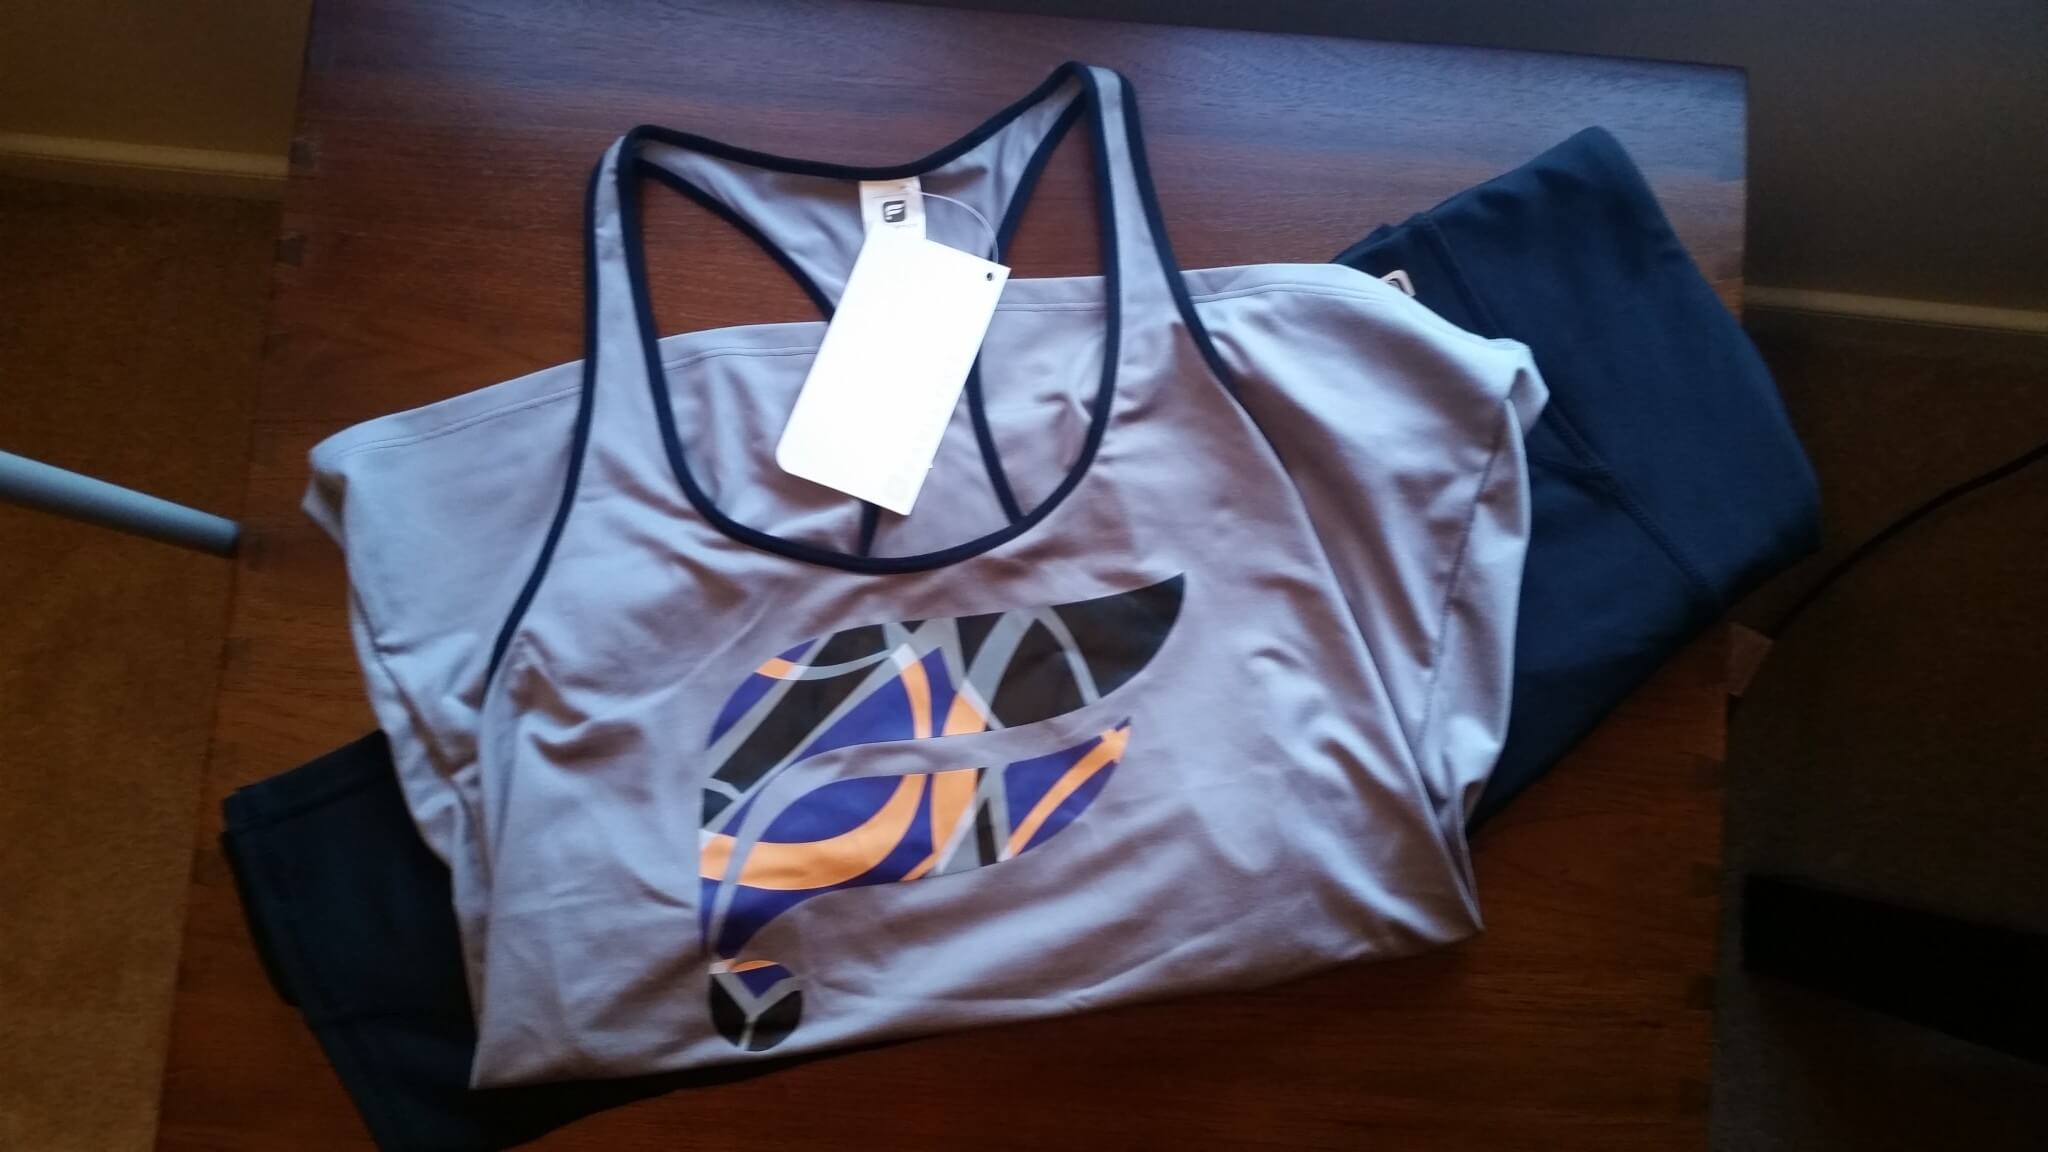 March 2016 Fabletics Review + First Outfit Half Off Coupon - Hello